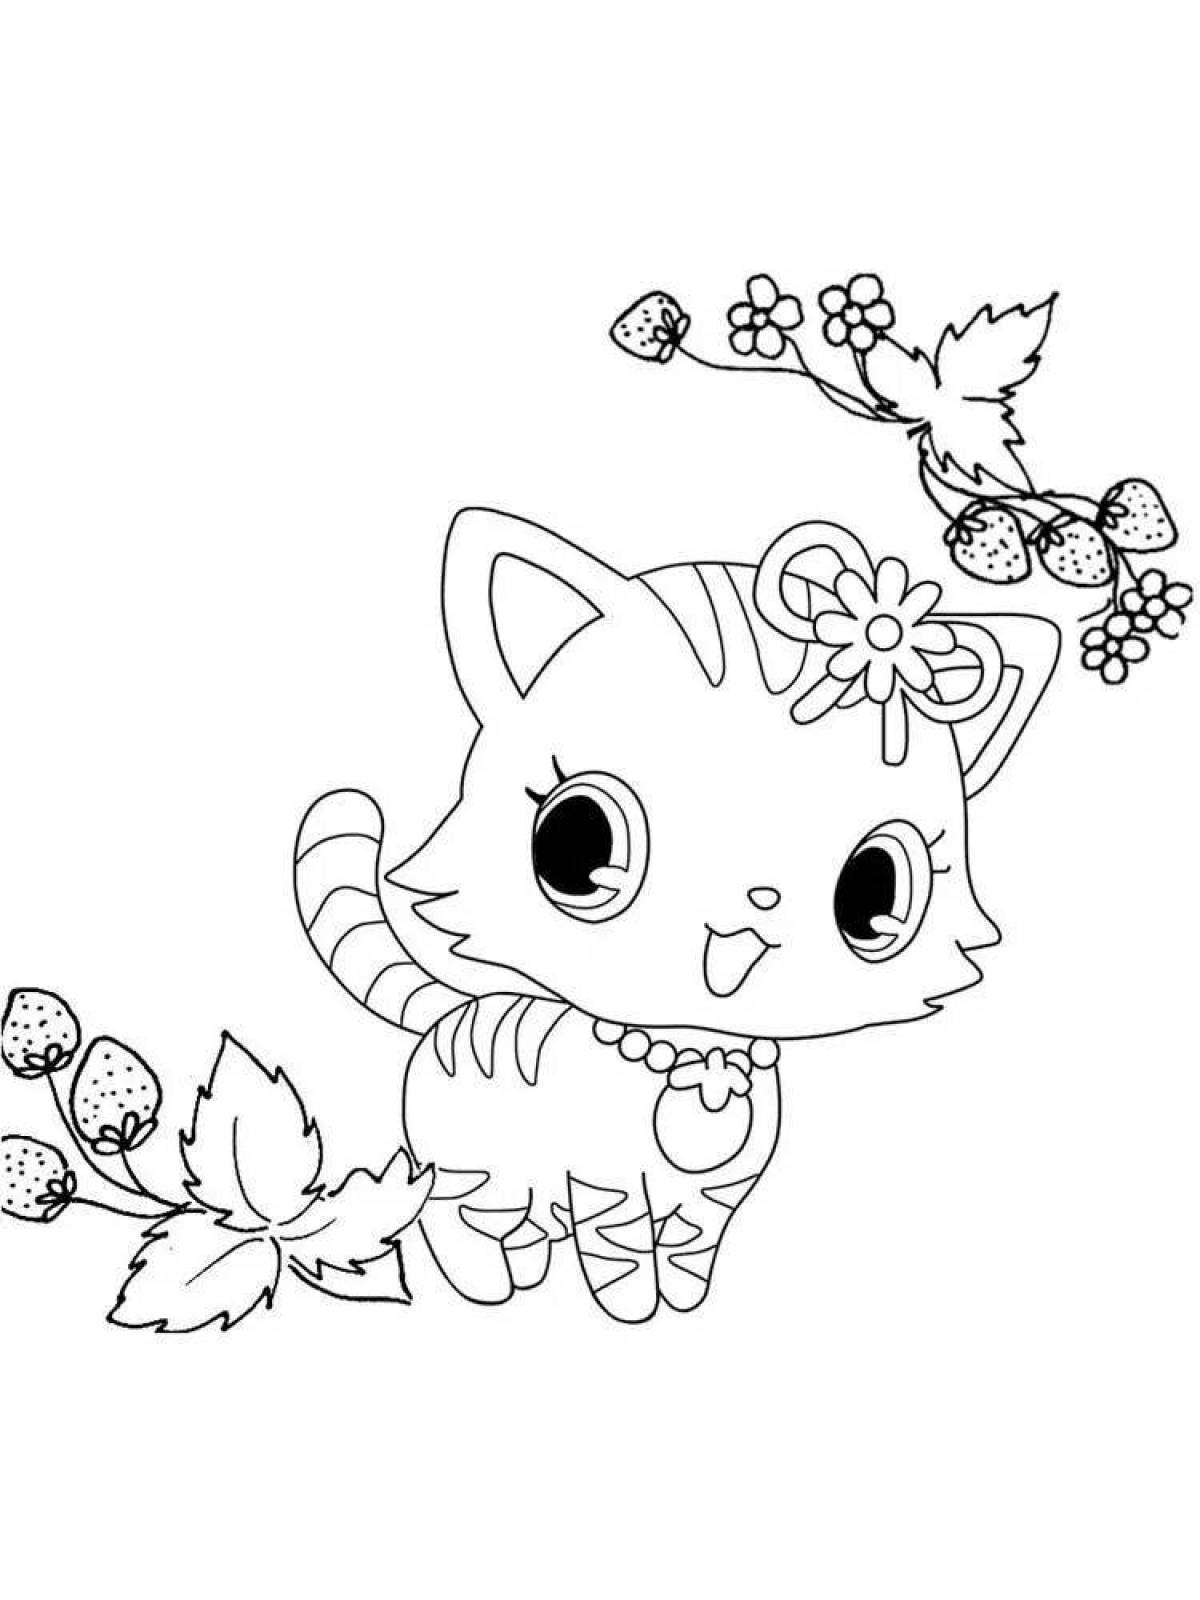 Adorable pets coloring pages